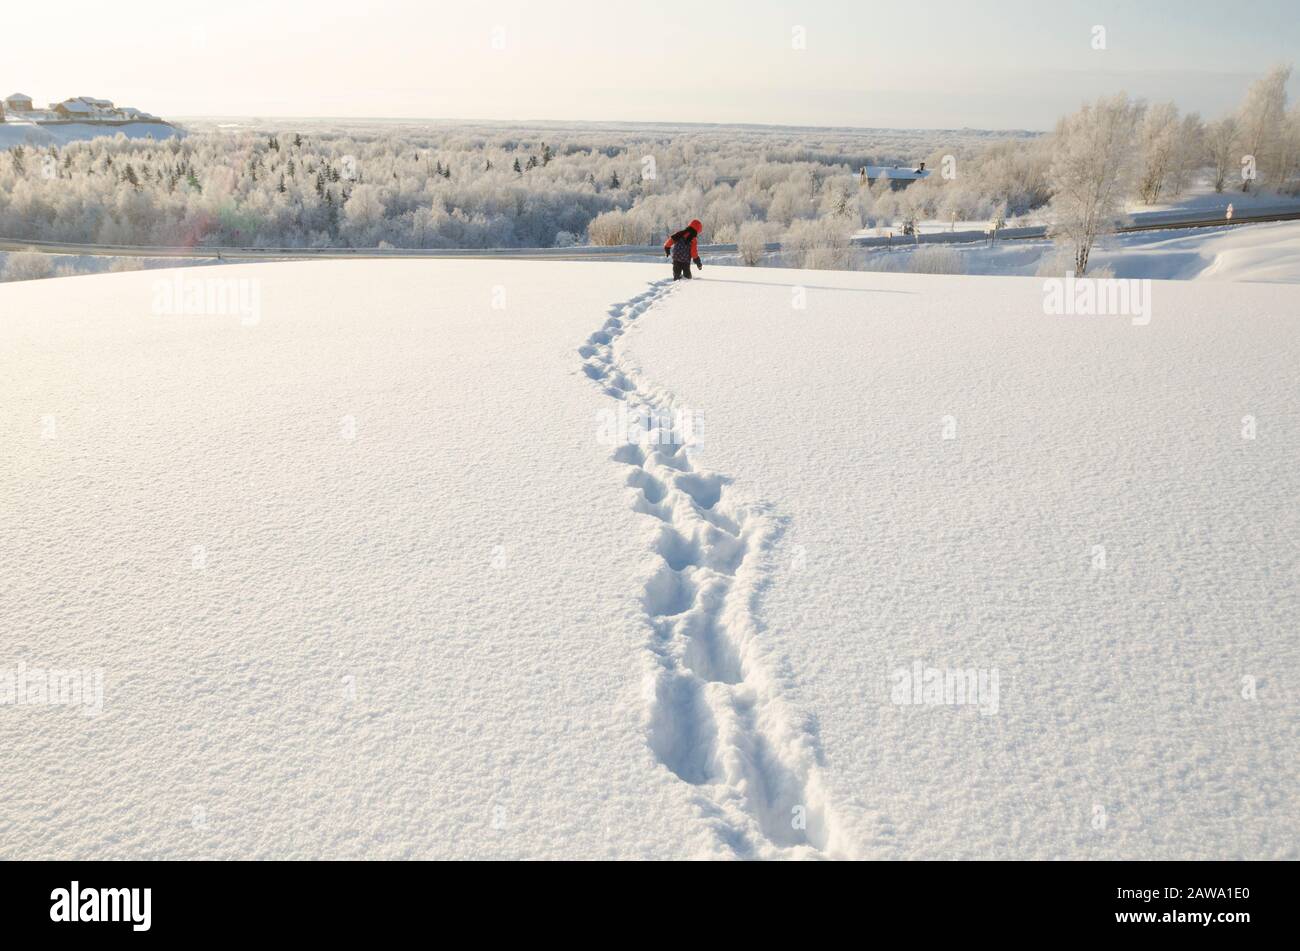 January 2020 - Malye Korely. The kid makes his way through the snowdrifts. Russia, Arkhangelsk region Stock Photo